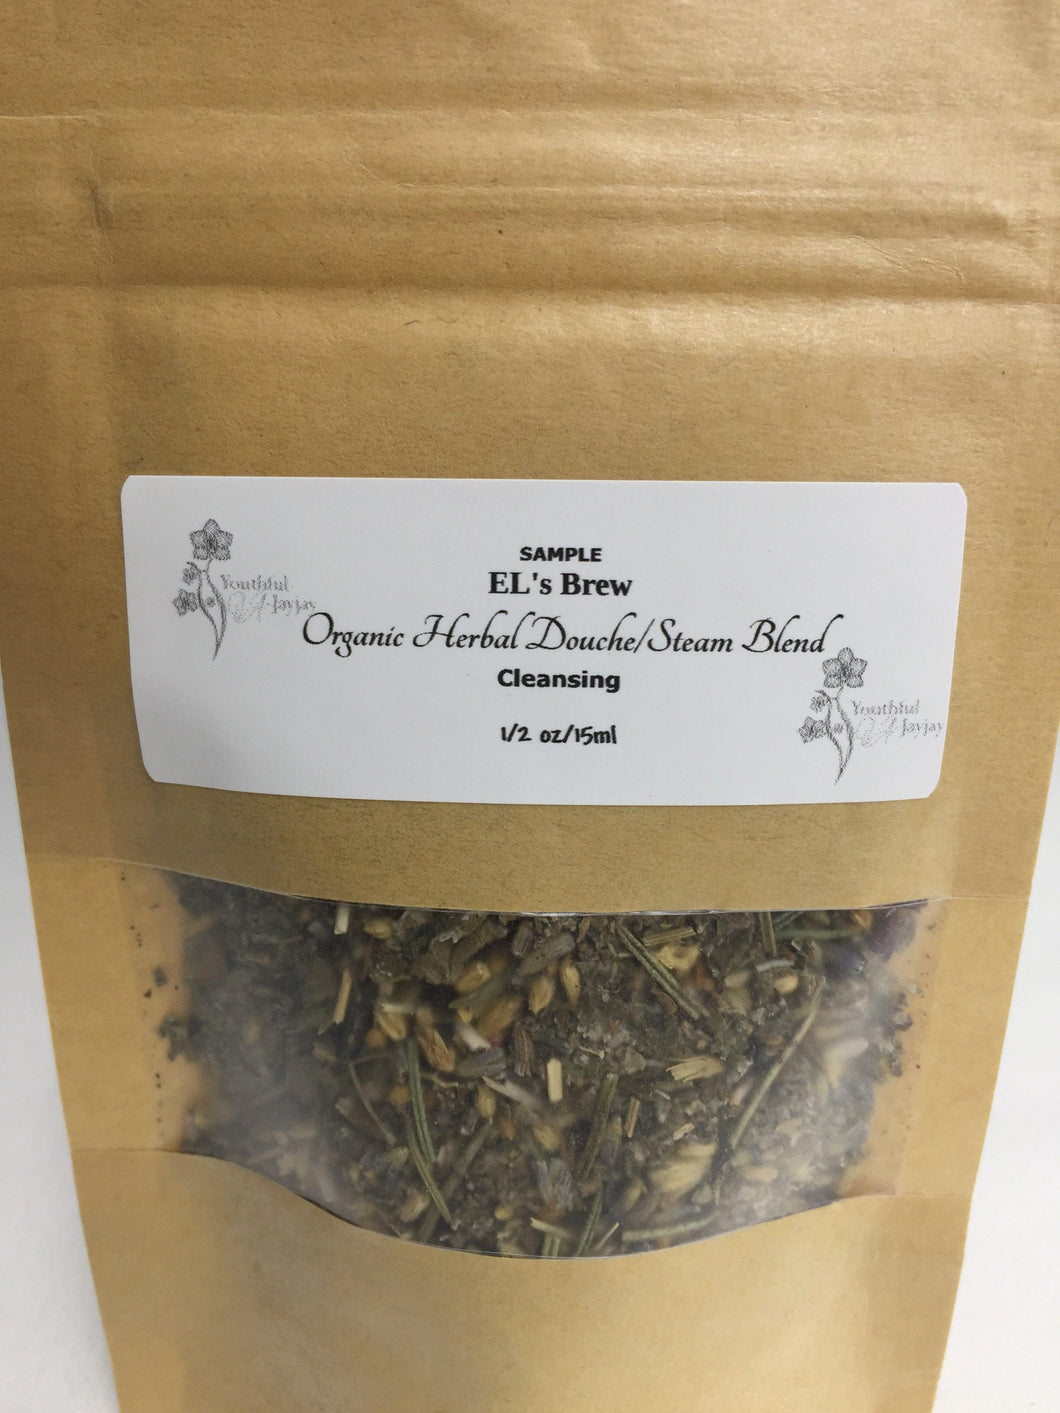 EL's Brew: Organic Herbal Steam/Douche Blend Sample Size, CLEANSING 1/2oz. - Image #1